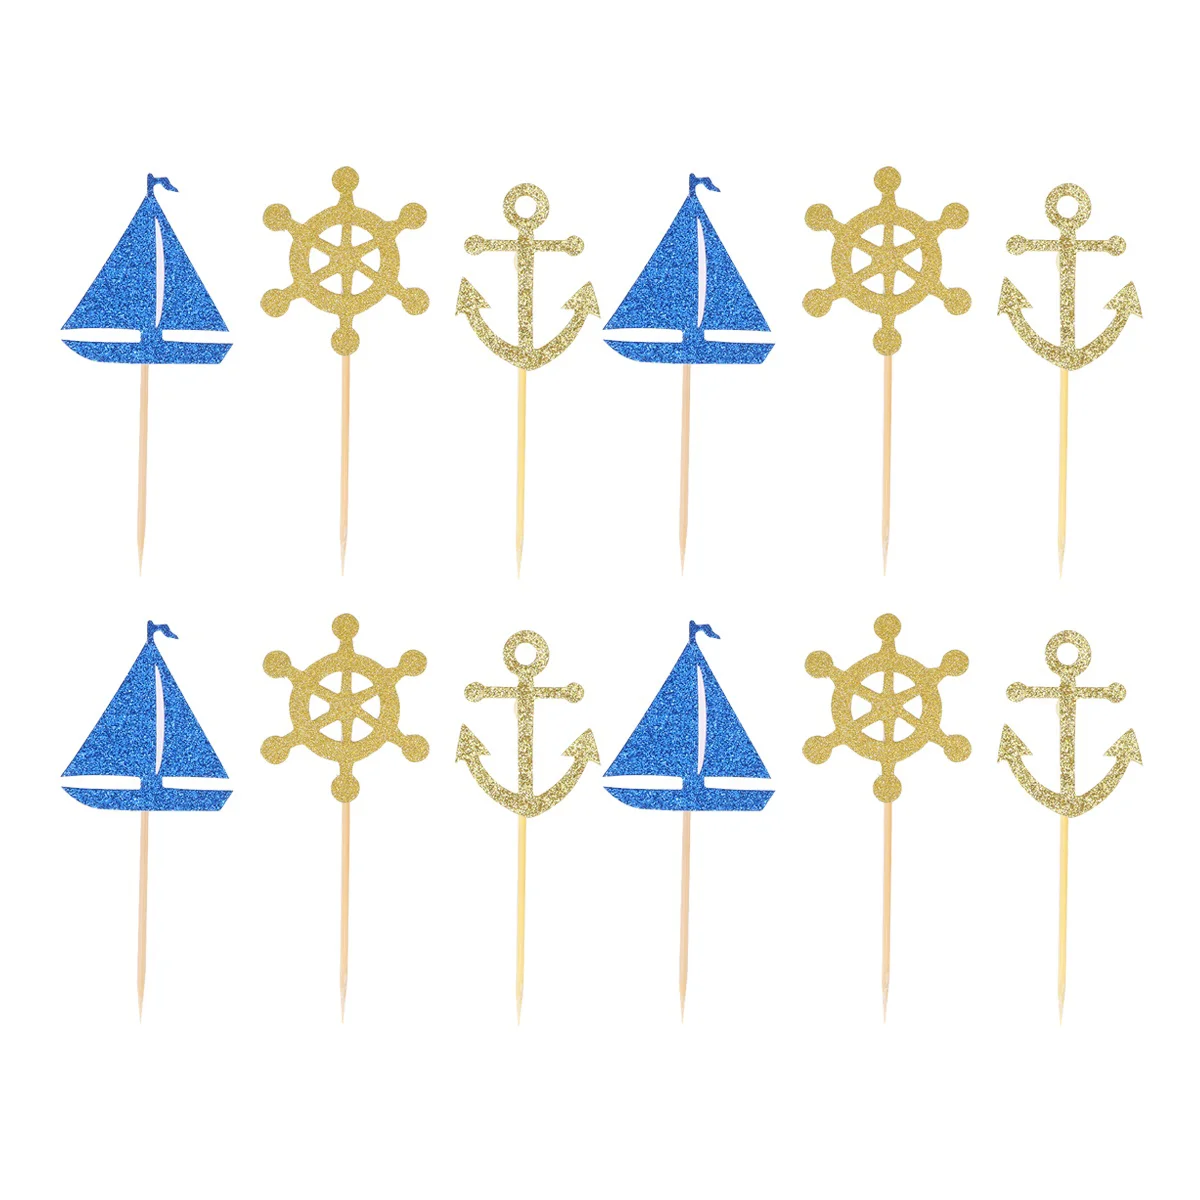 

24pcs Nautical Cupcake Toppers Anchor Rudder Sailboat Shower Toothpicks Ocean Theme Party Supplies